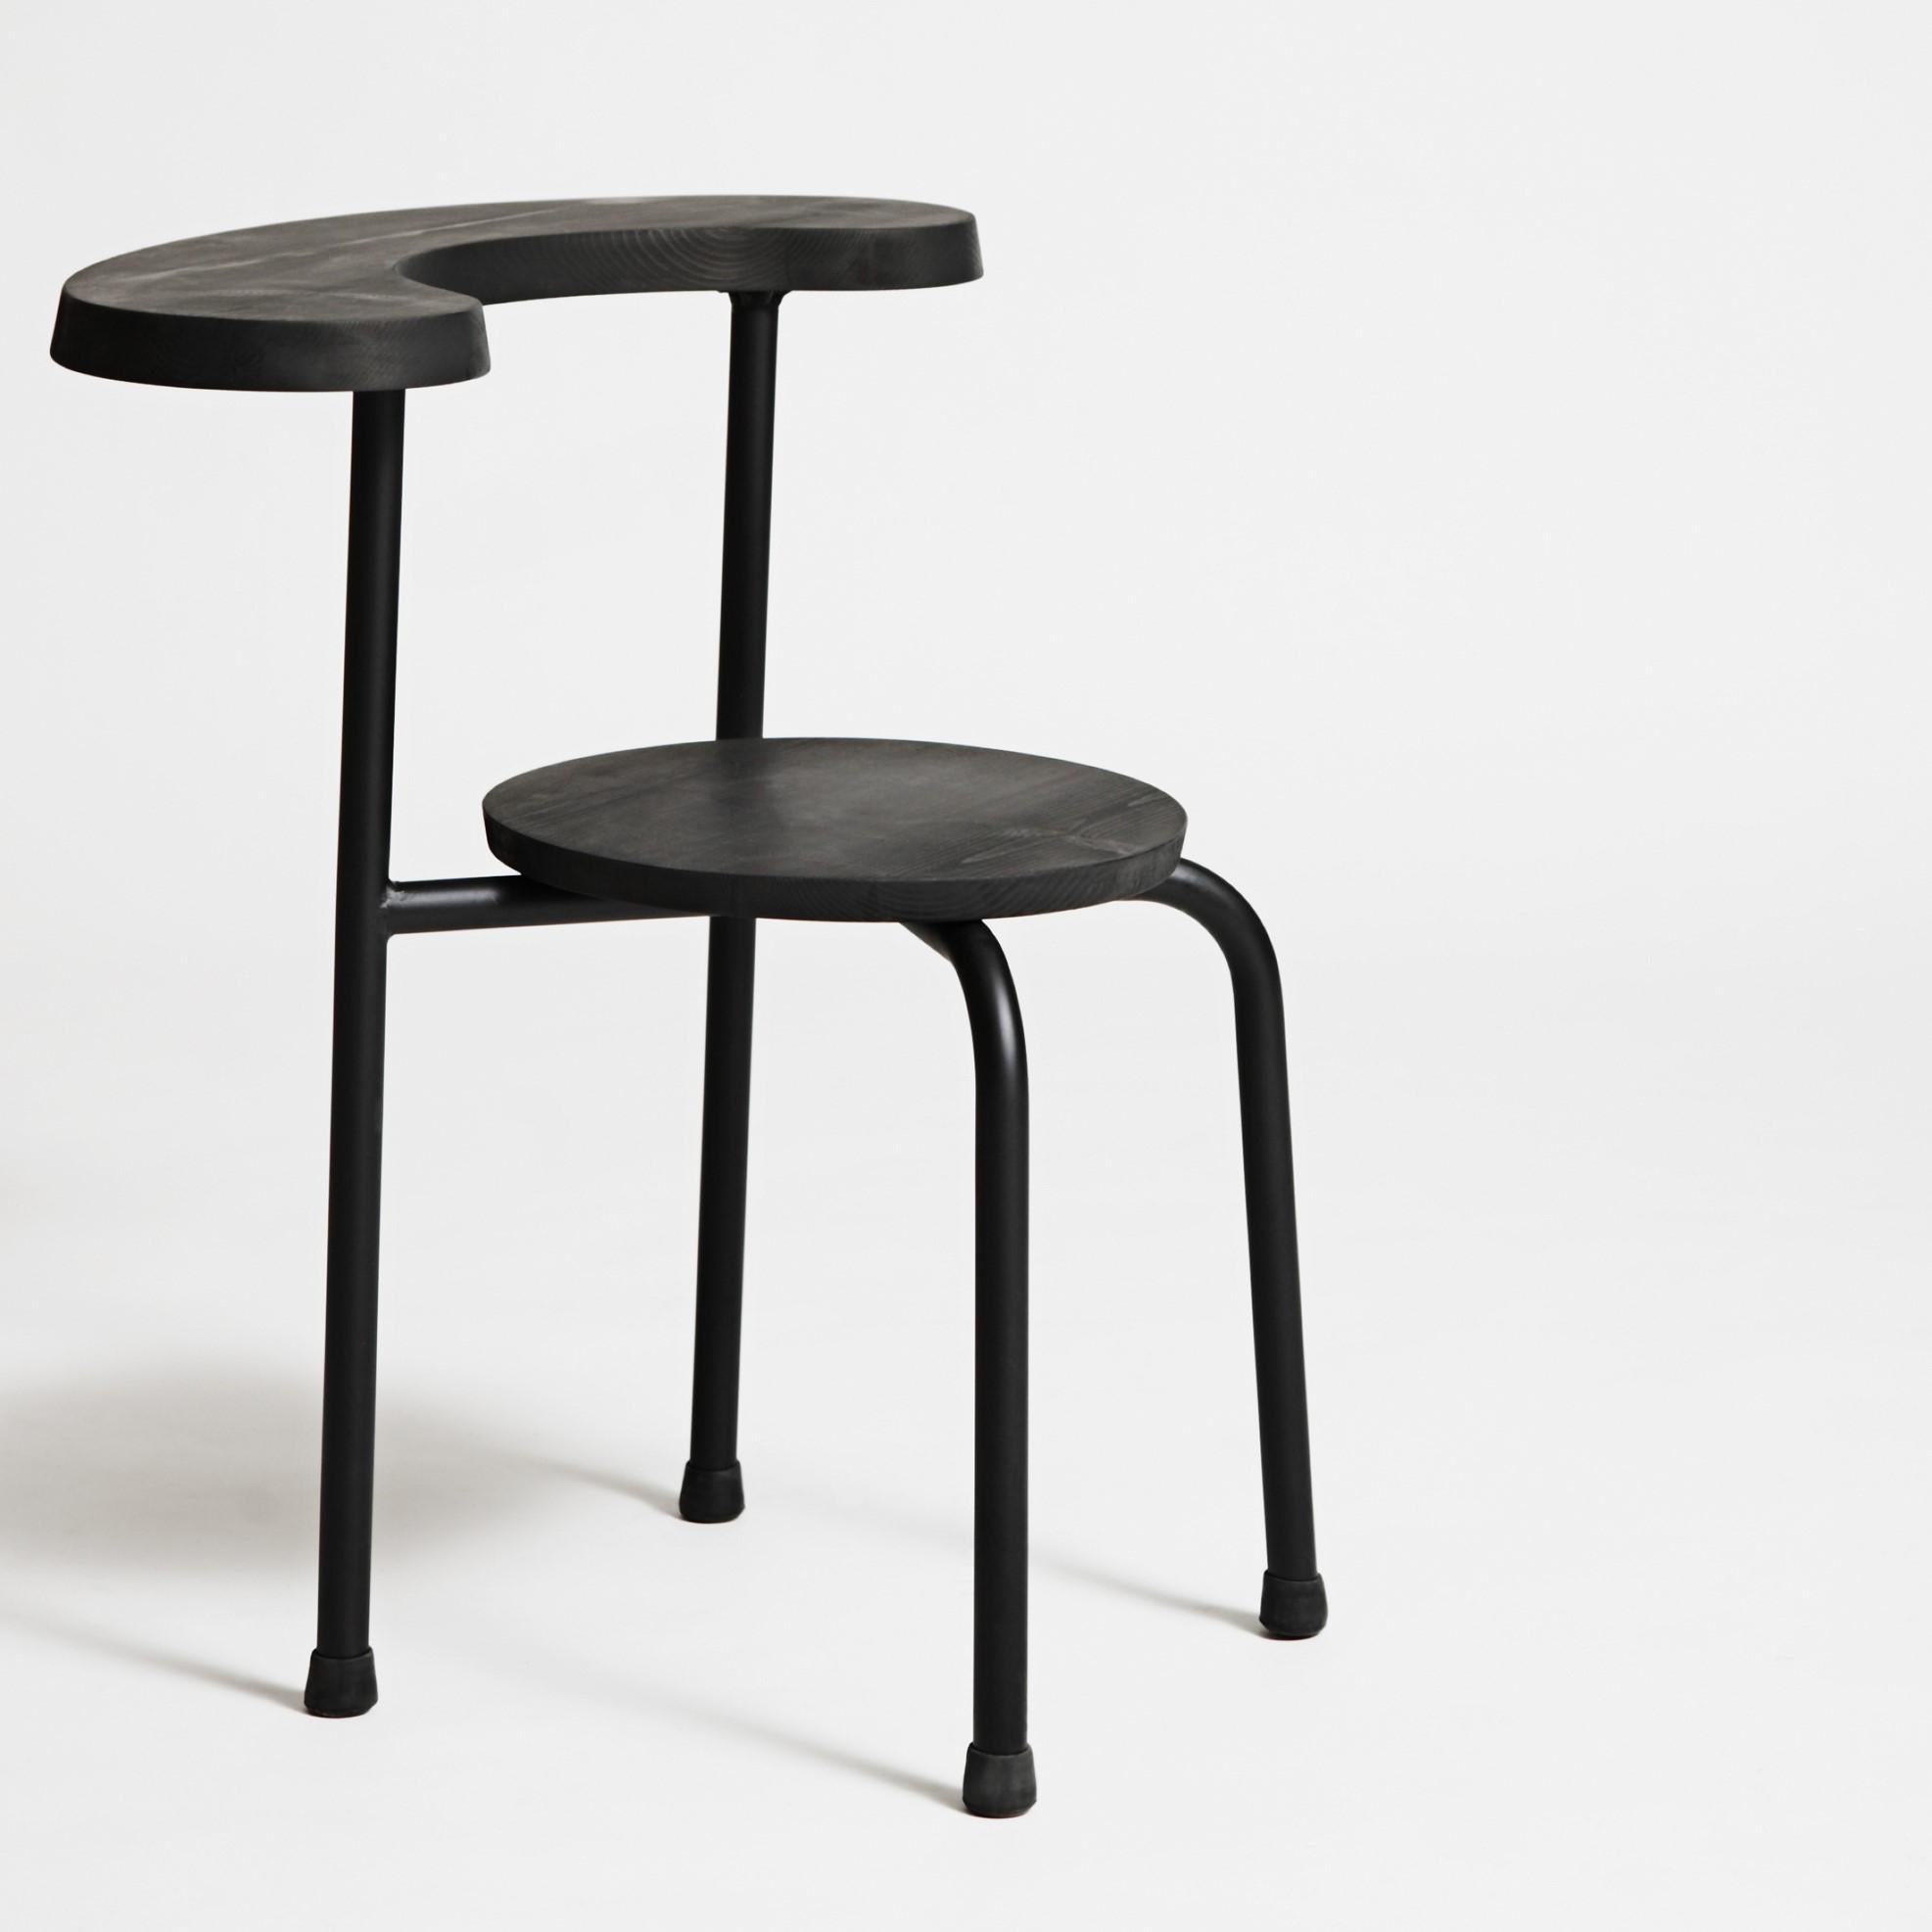 Unique bug stool by Kim Thome
Dimensions: W 55 x D 55 x  H 70 cm
Materials: Steel frame, powder coated, ebonised ash

Kim Thomé is a Norwegian designer based in London.